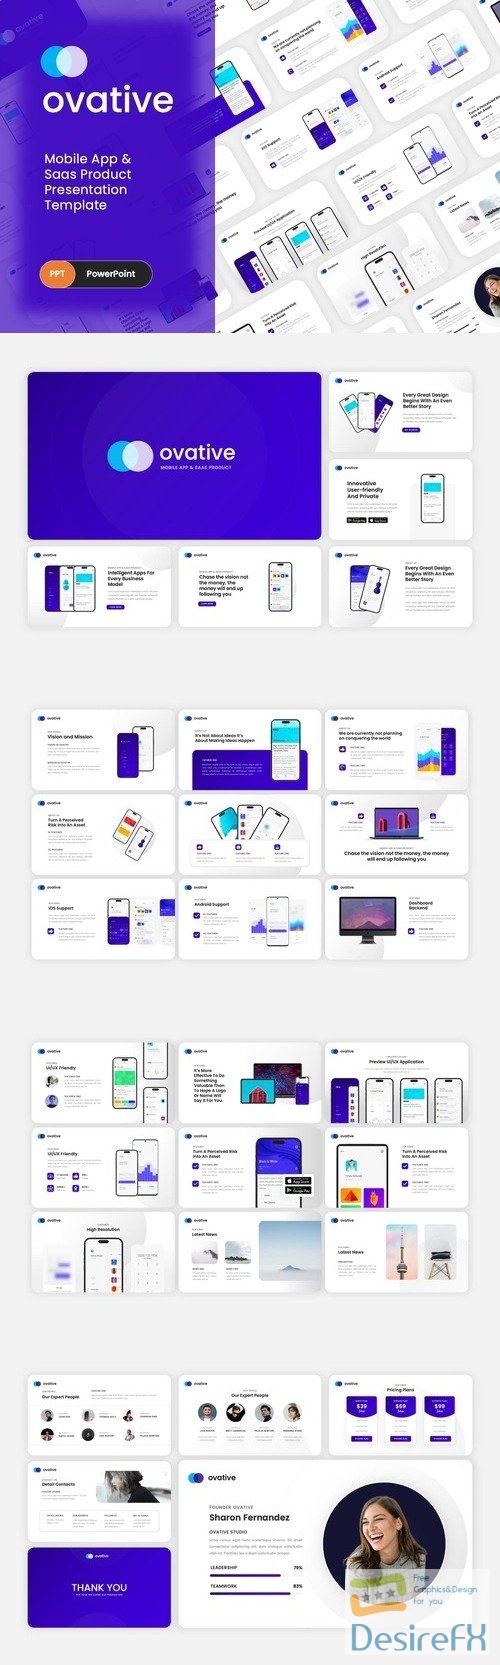 Ovative - Mobile Apps & SAAS PowerPoint Template